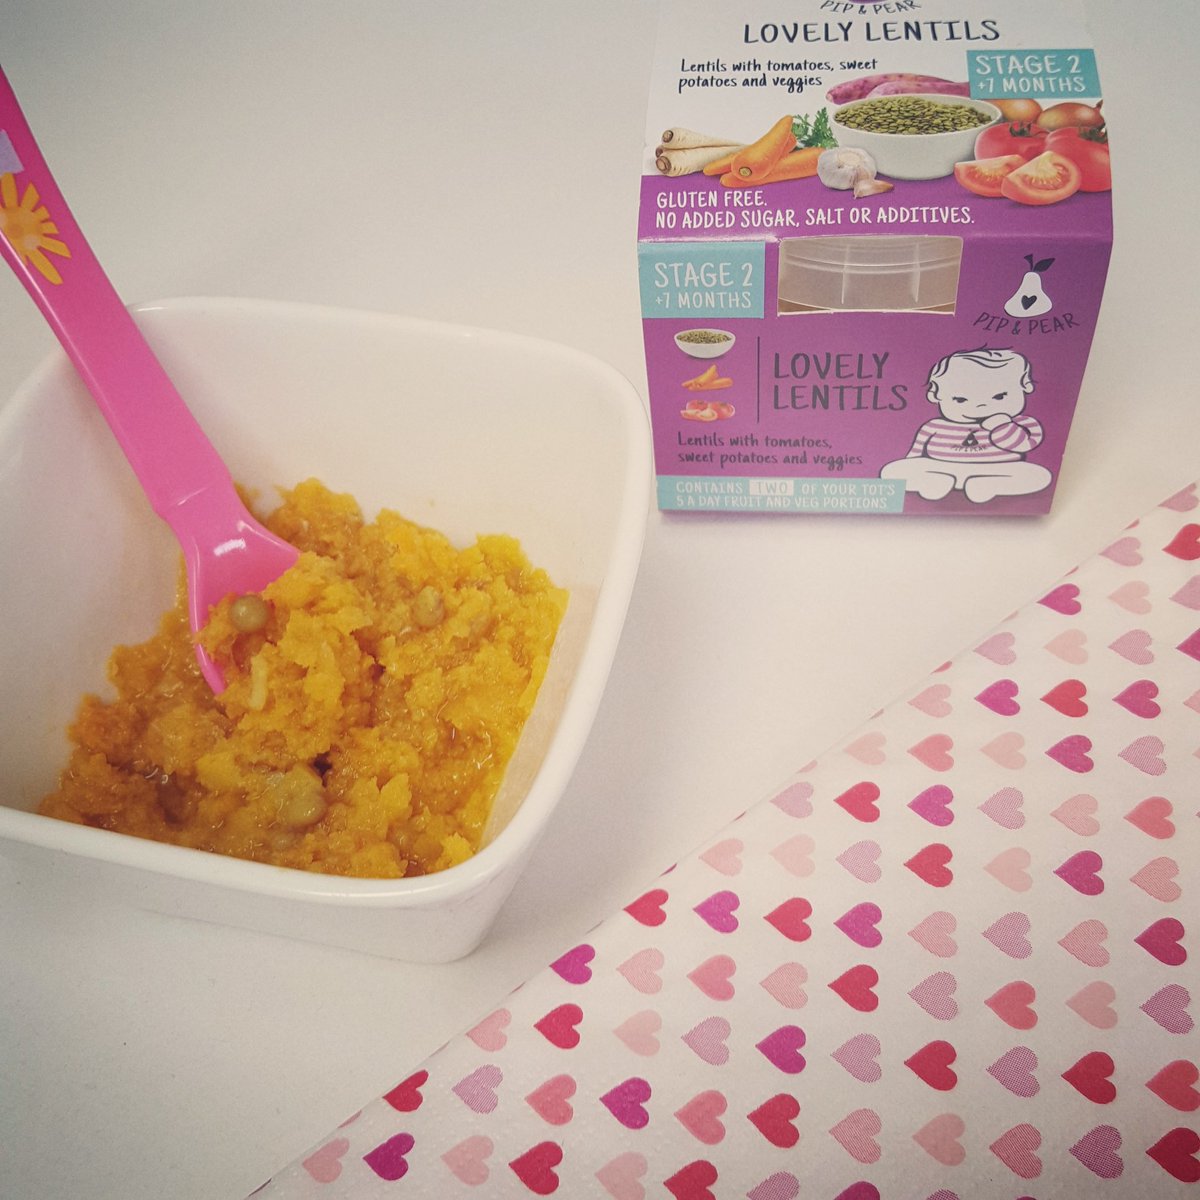 Our stage two Lovely Lentils is our tasty vegetarian option 👌 #babyfood #irishfood #nothingadded